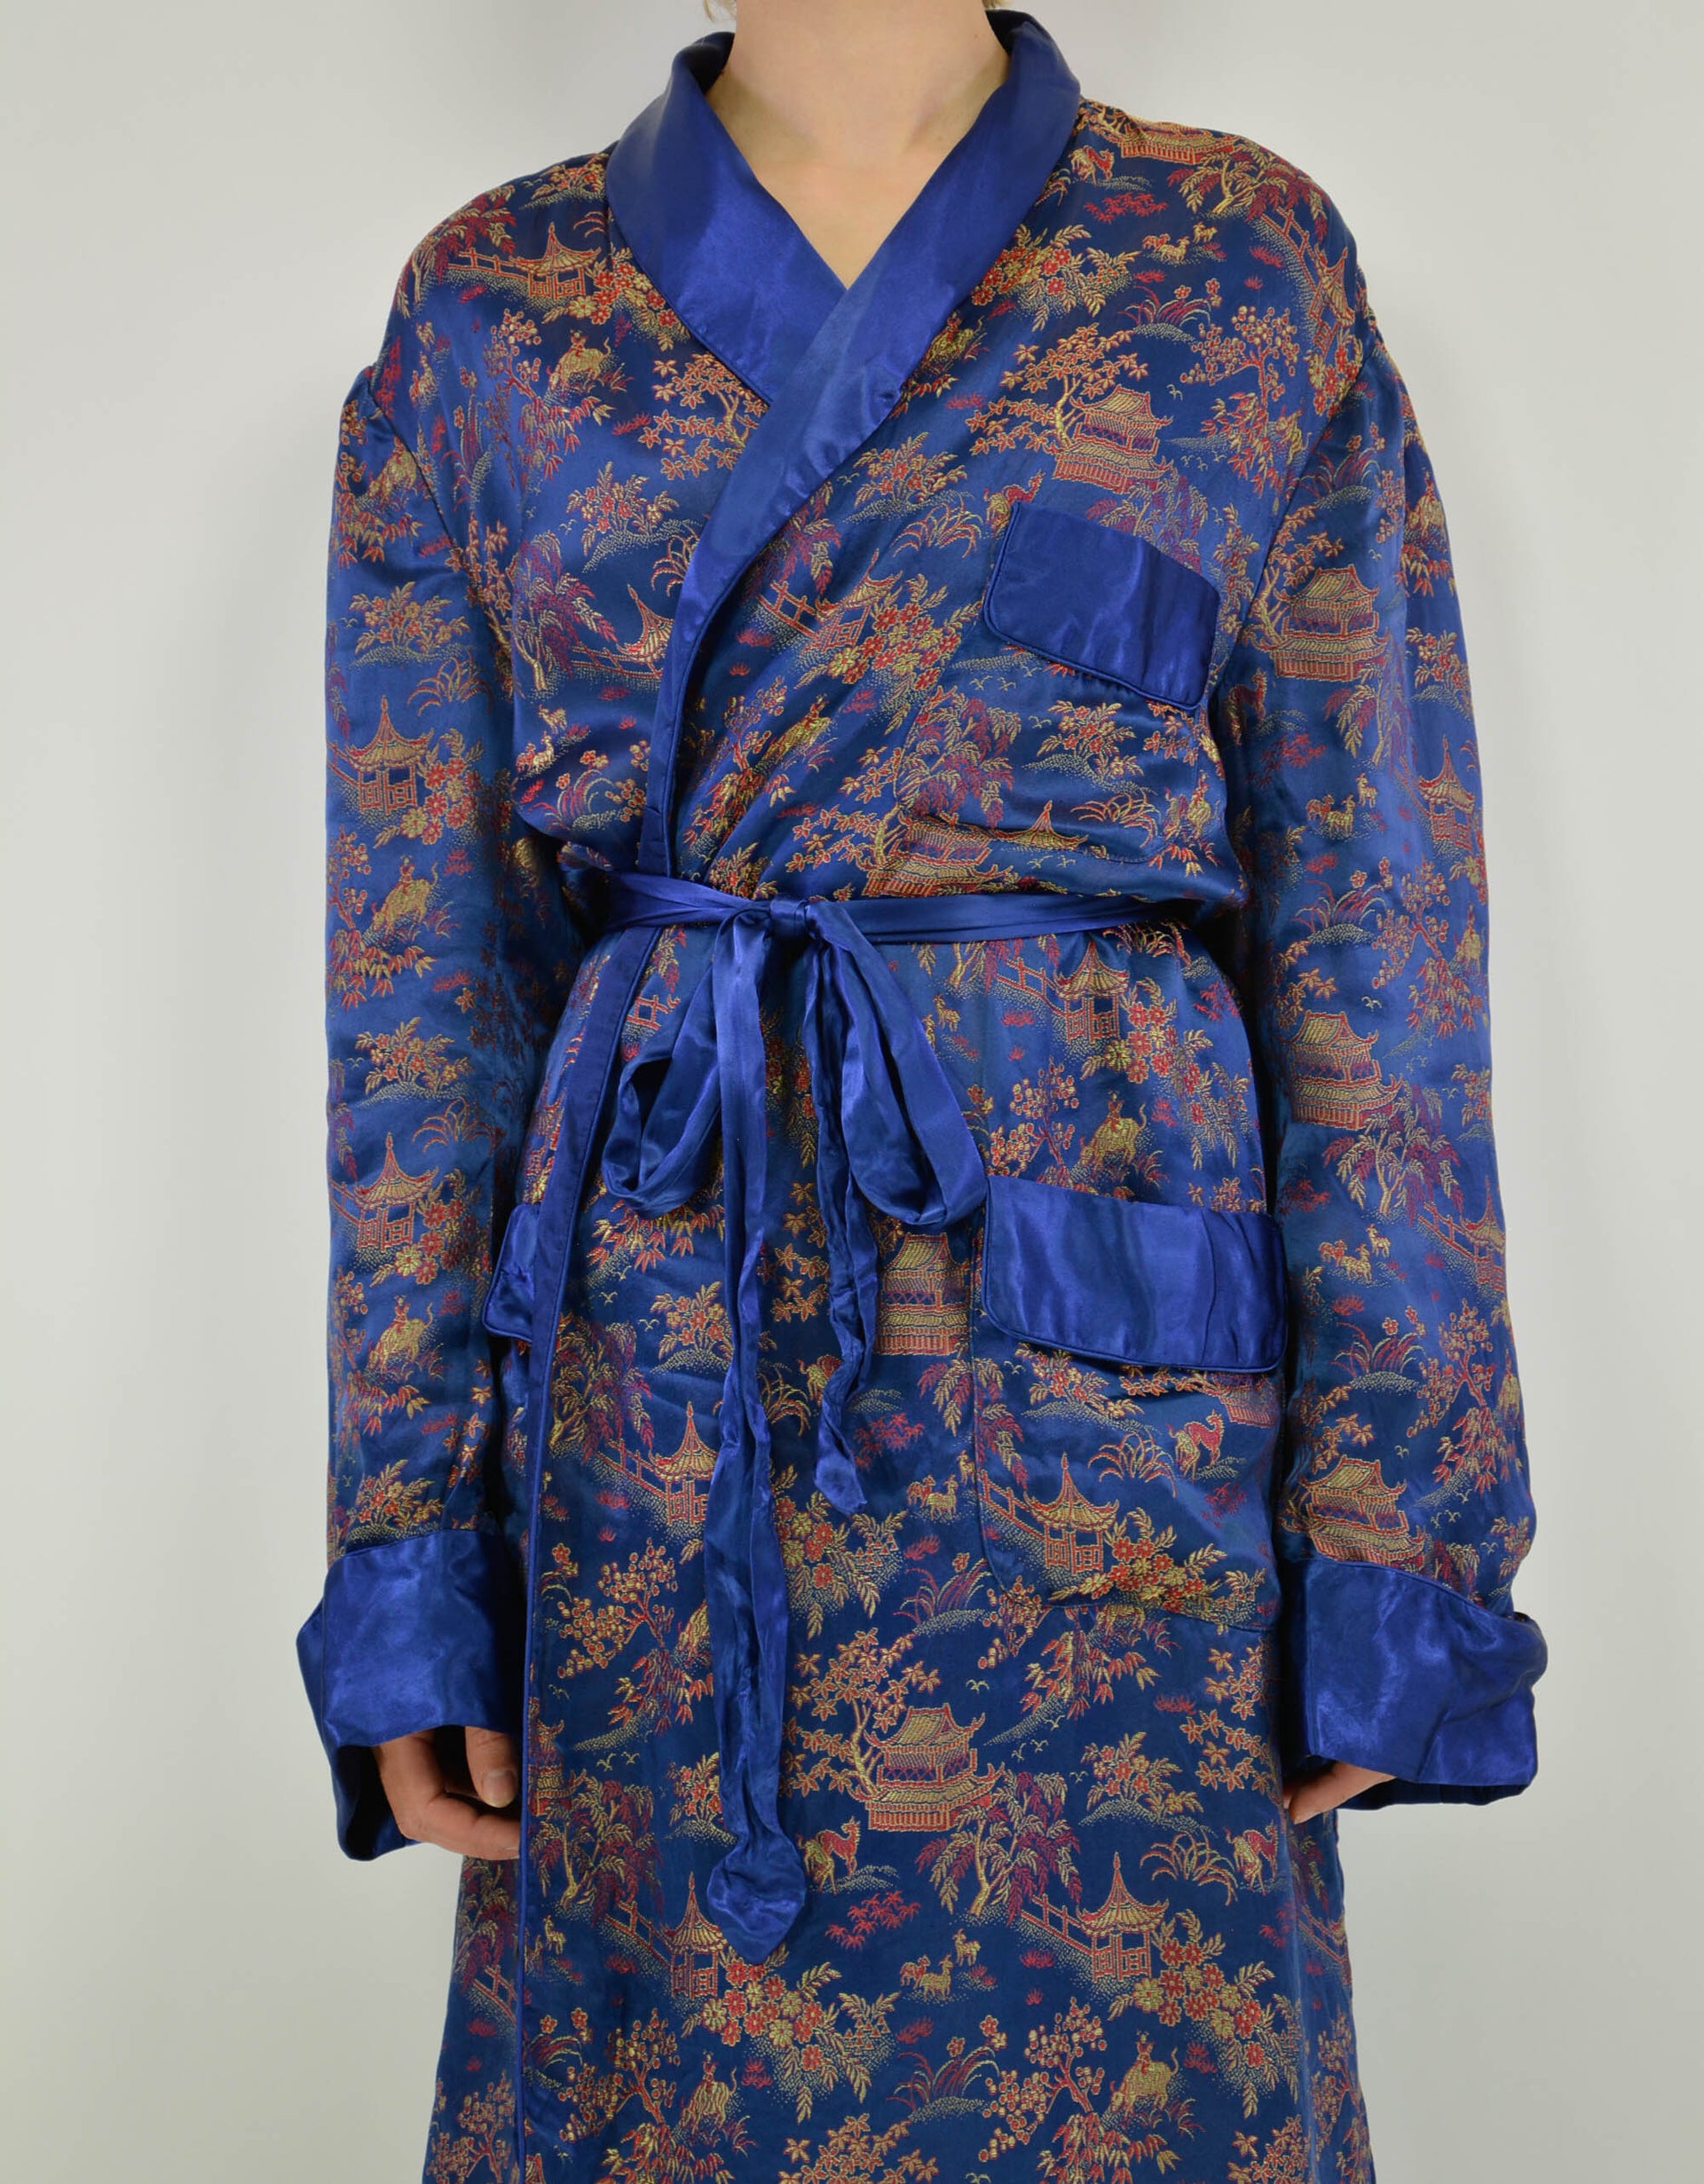 Dressing gown - PICKNWEIGHT - VINTAGE KILO STORE